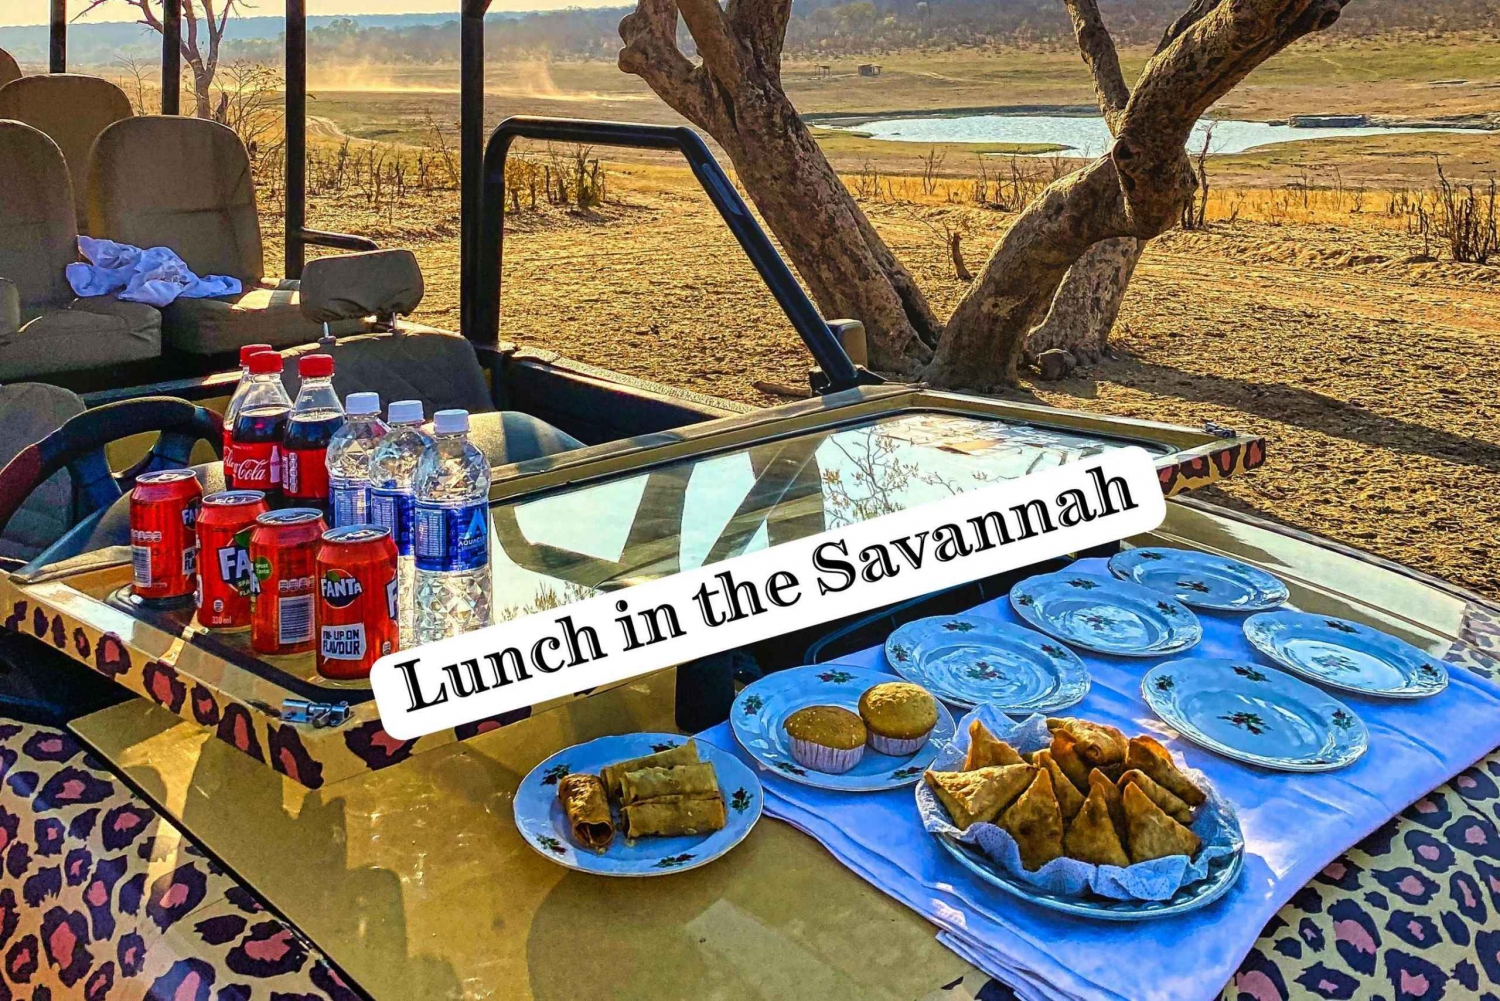 Victoria Falls: Lunch in the Savannah